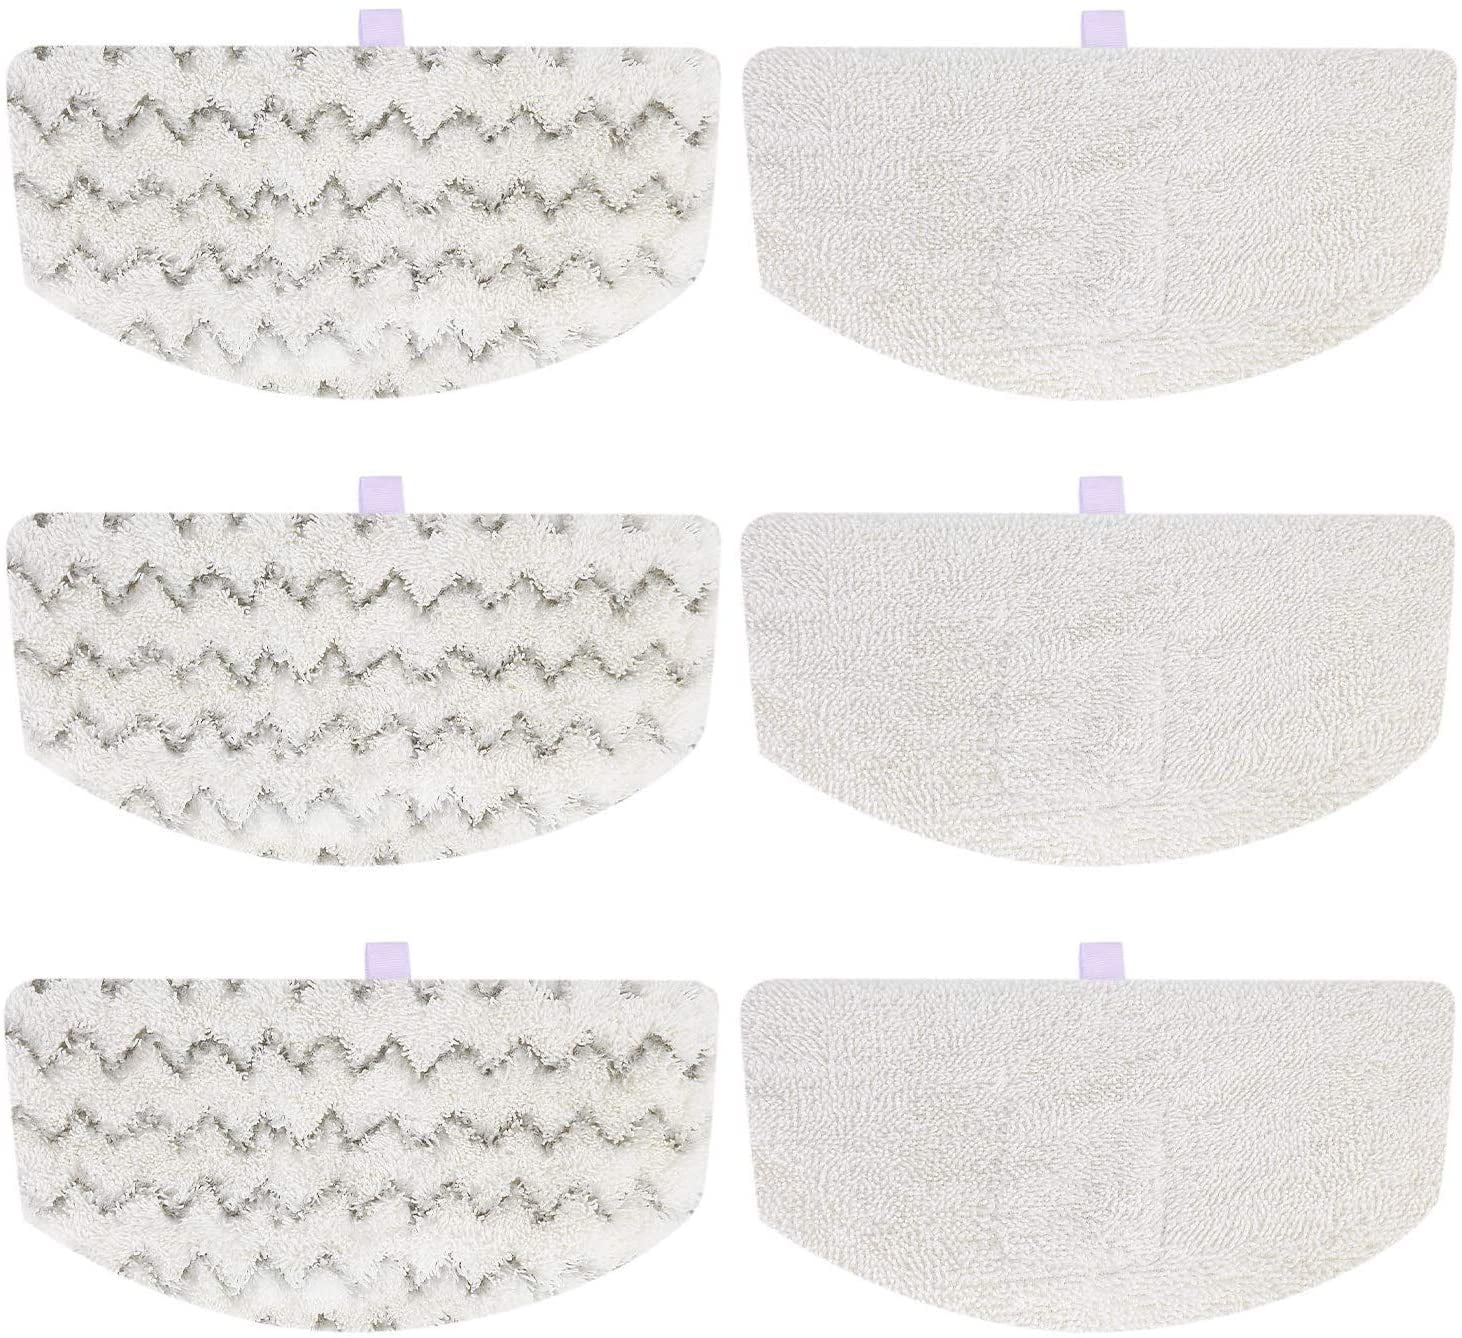 3 Steam Mop Pads fits Bissell PowerFresh Pad 1940 203-2633 19402 19404 19408 